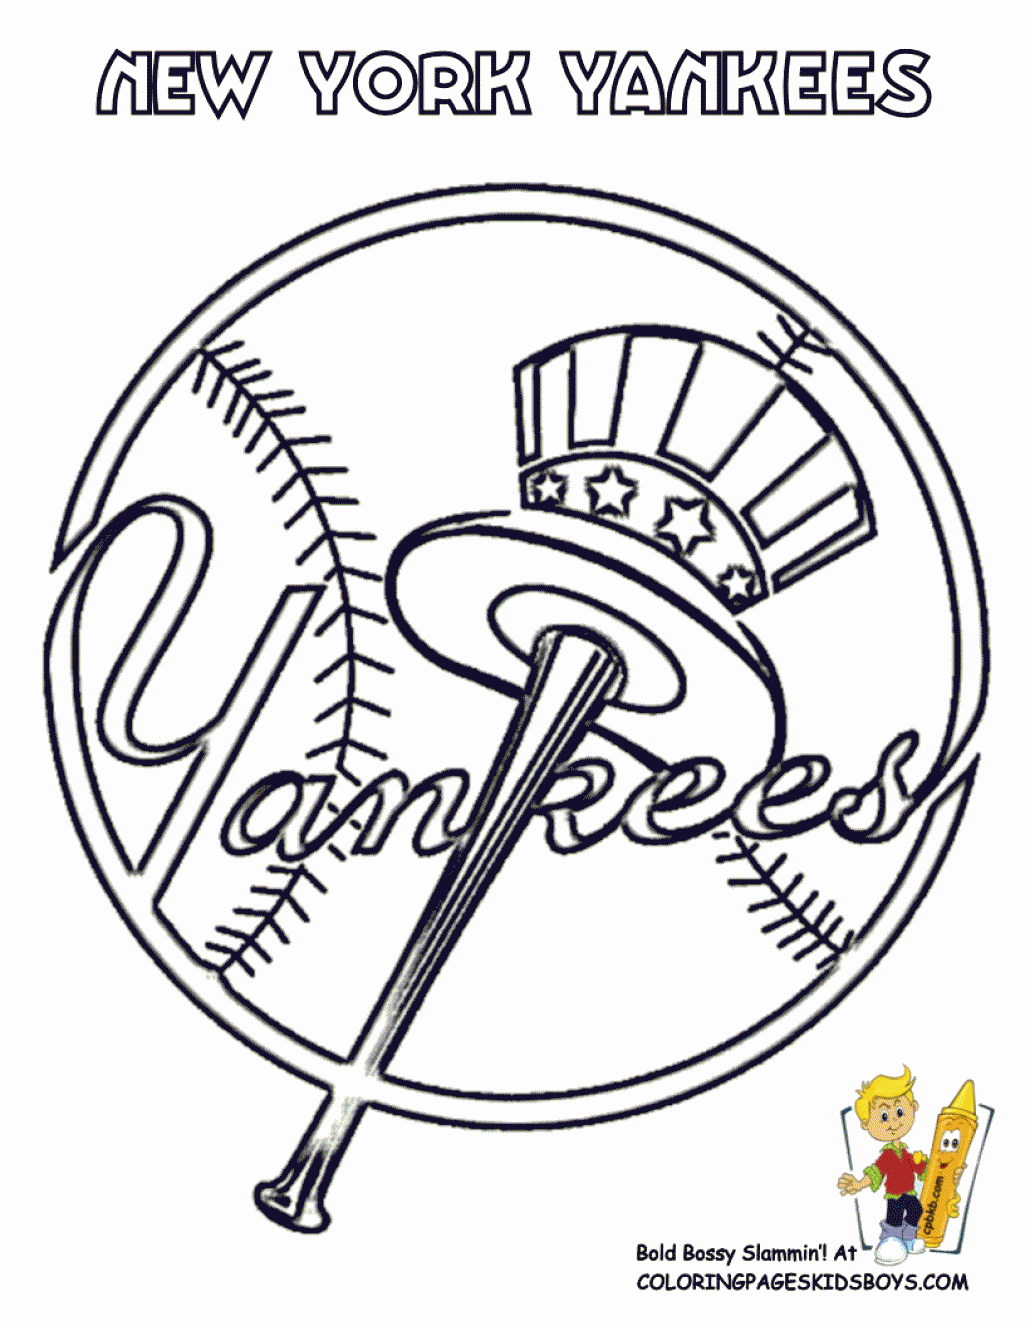 blackhawks coloring pages